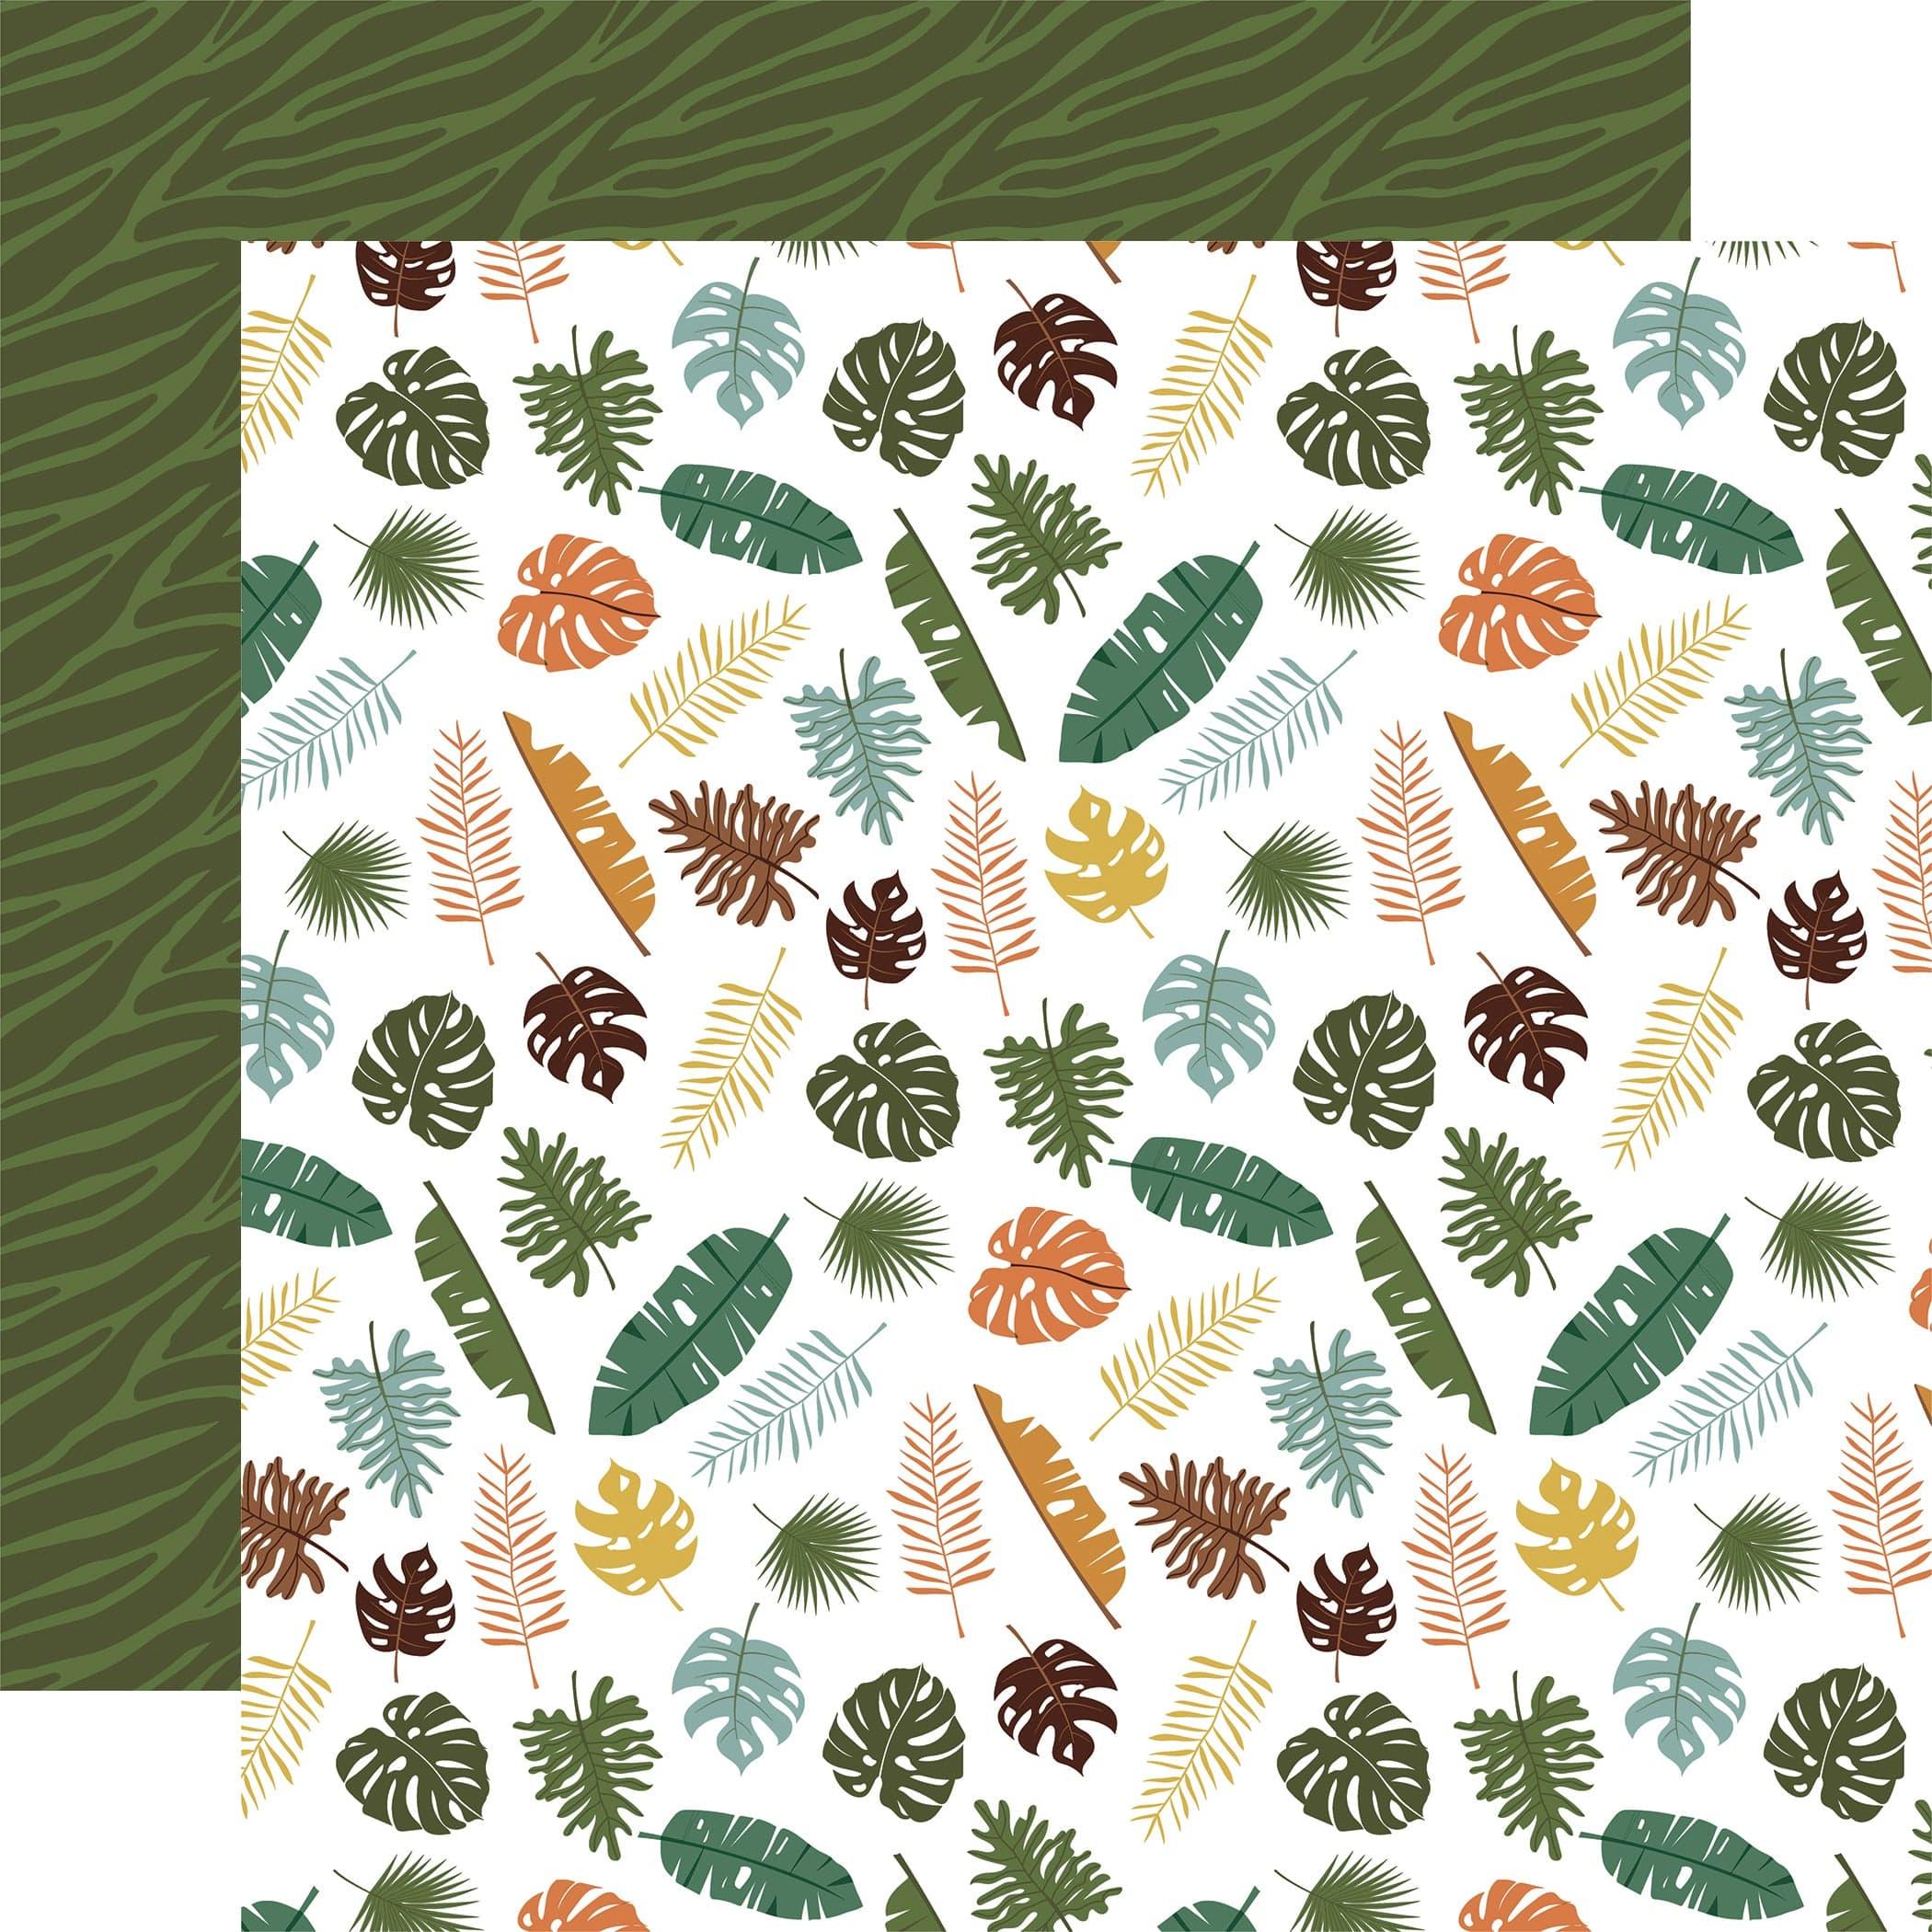 Little Explorer Collection Welcome To The Jungle 12 x 12 Double-Sided Scrapbook Paper by Echo Park Paper - Scrapbook Supply Companies